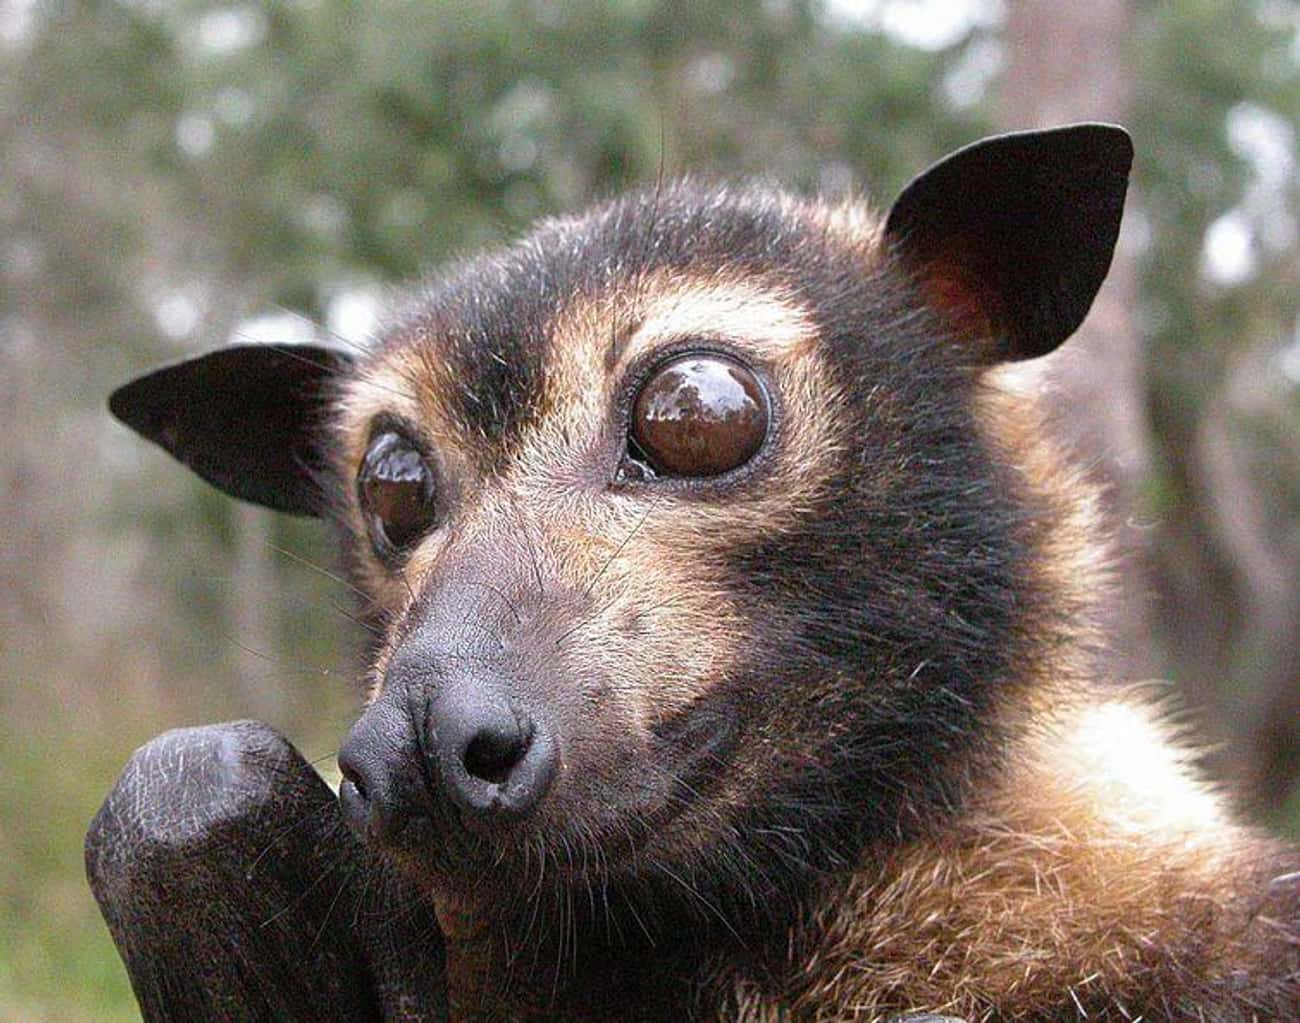 Flying Foxes Don't Use Echolocation